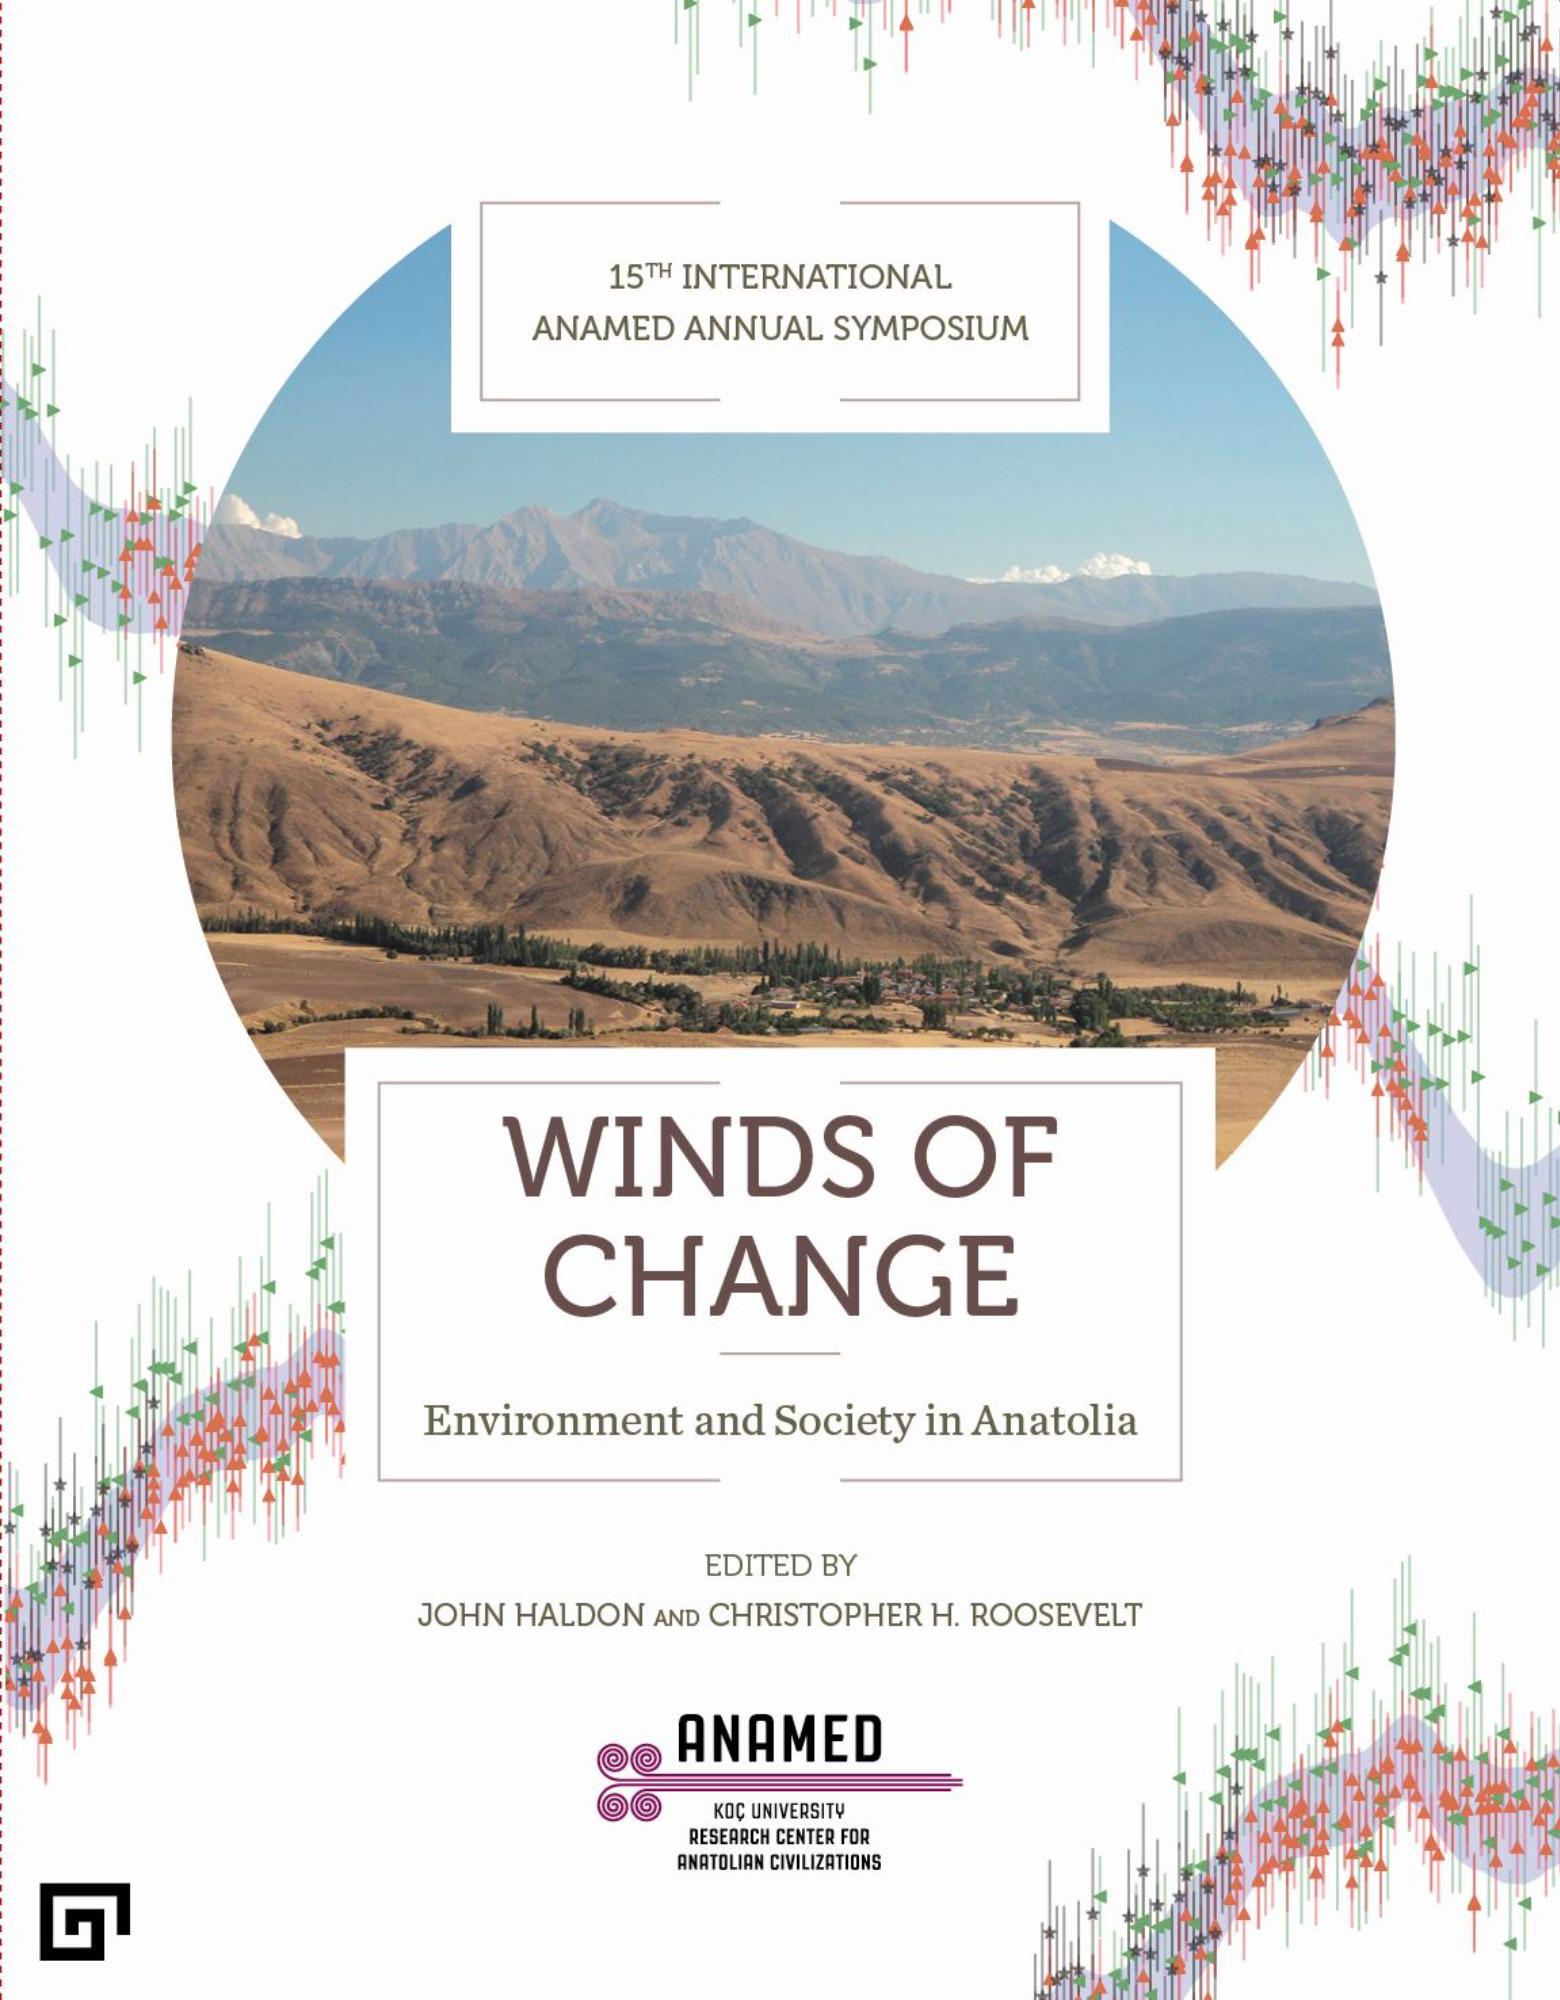 Haldon, John – Christopher H. Roosevelt; Winds of Change. Environment and Society in Anatolia